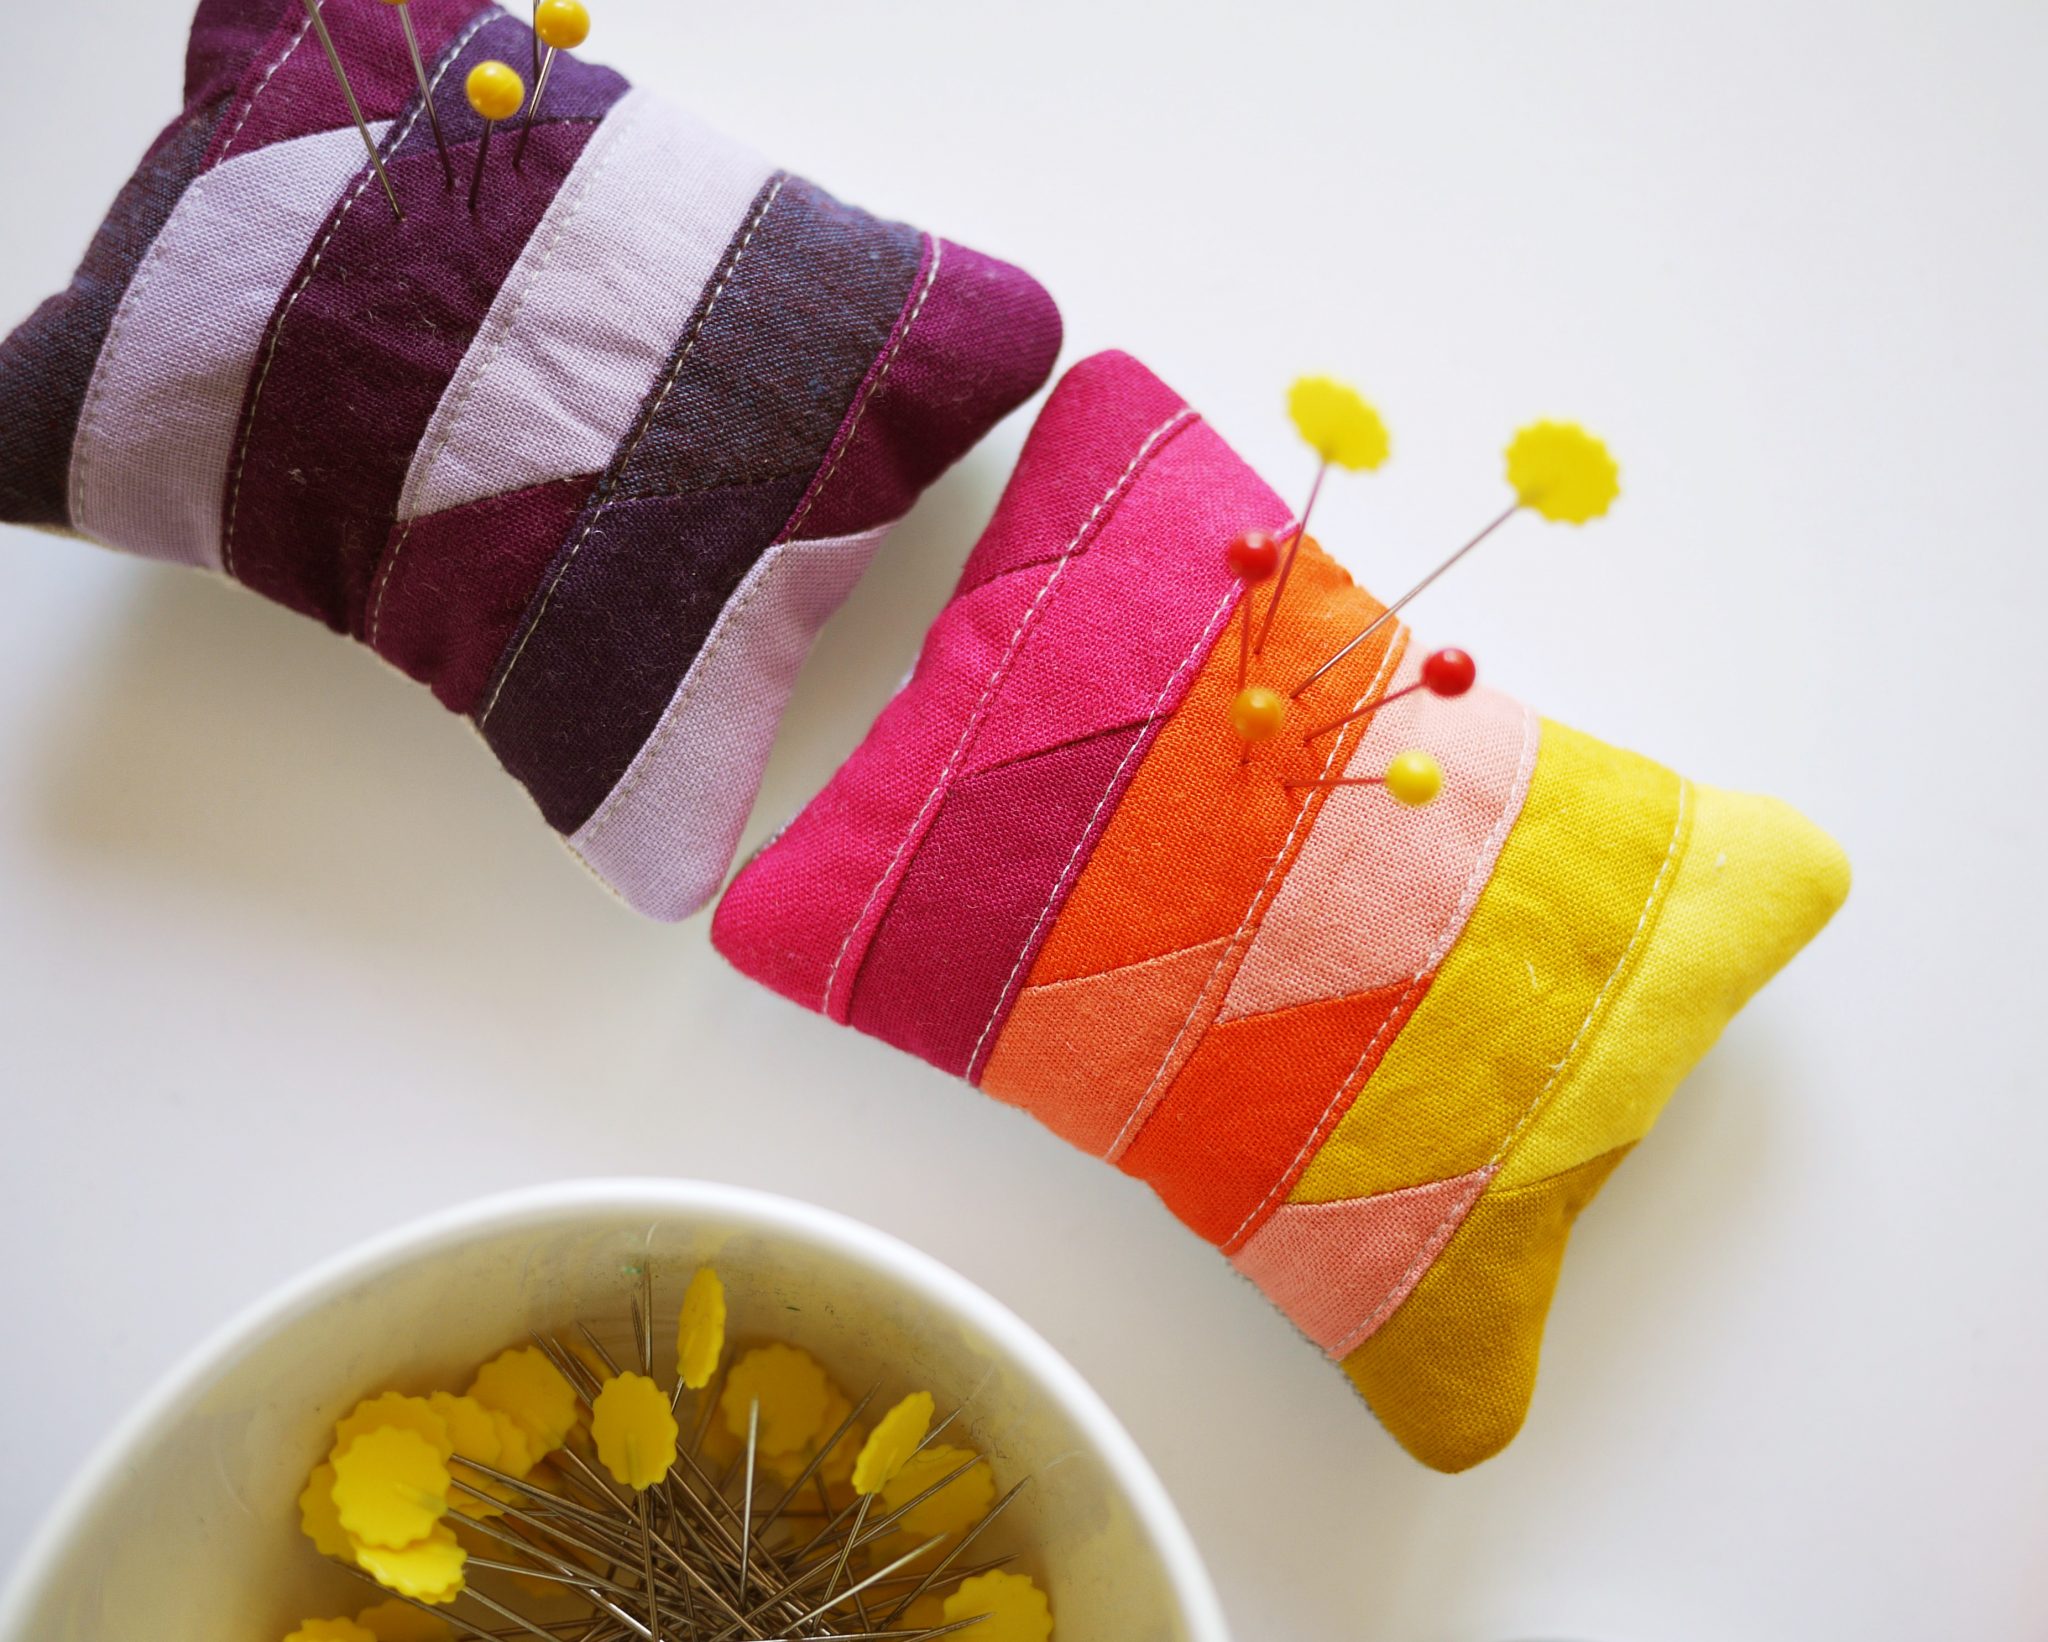 3rd Story Workshop - Pin Cushions, Colour